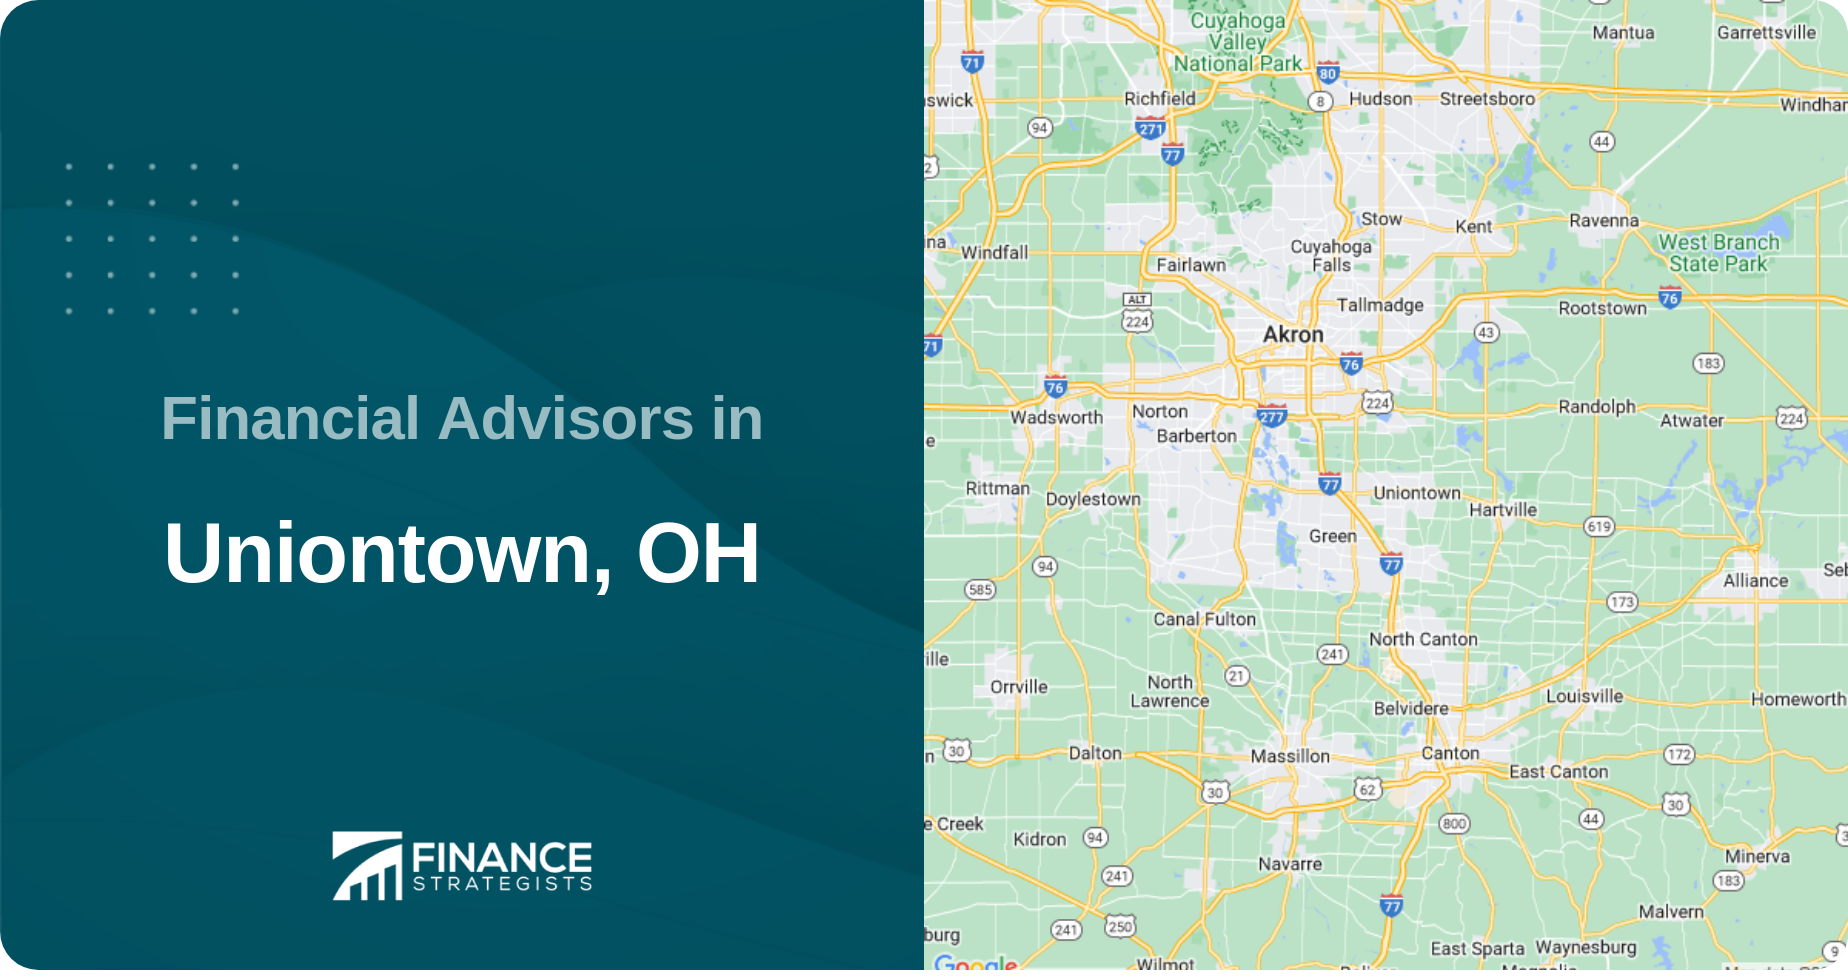 Financial Advisors in Uniontown, OH